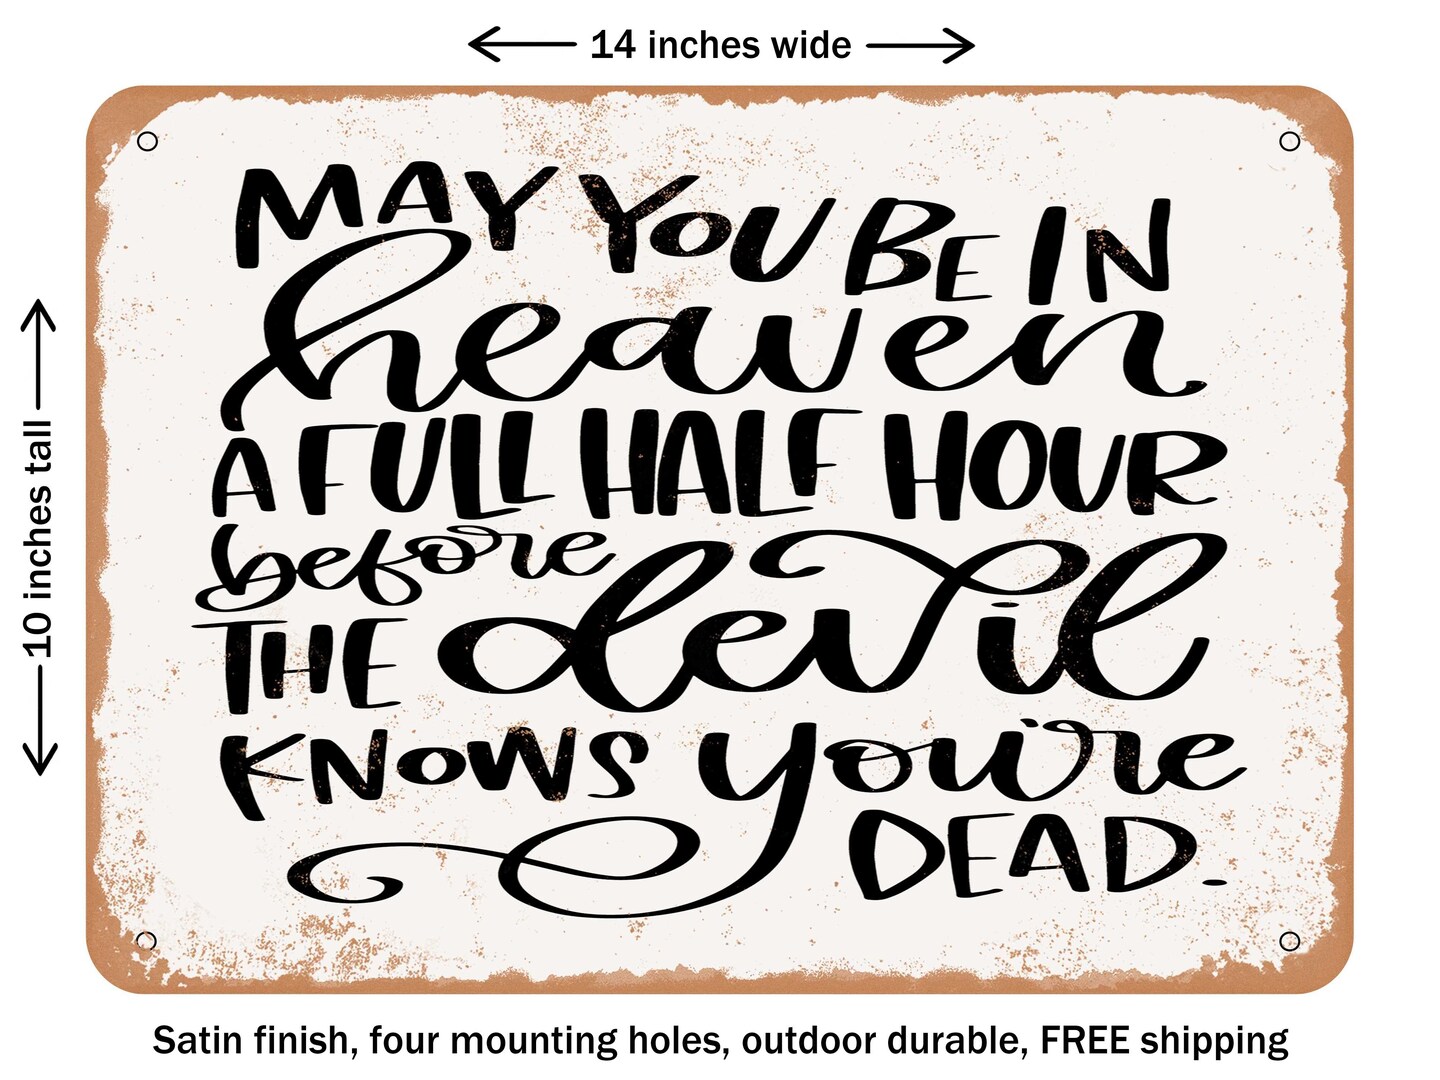 DECORATIVE METAL SIGN - May You Be In Heaven a Full Half Hour Before - Vintage Rusty Look